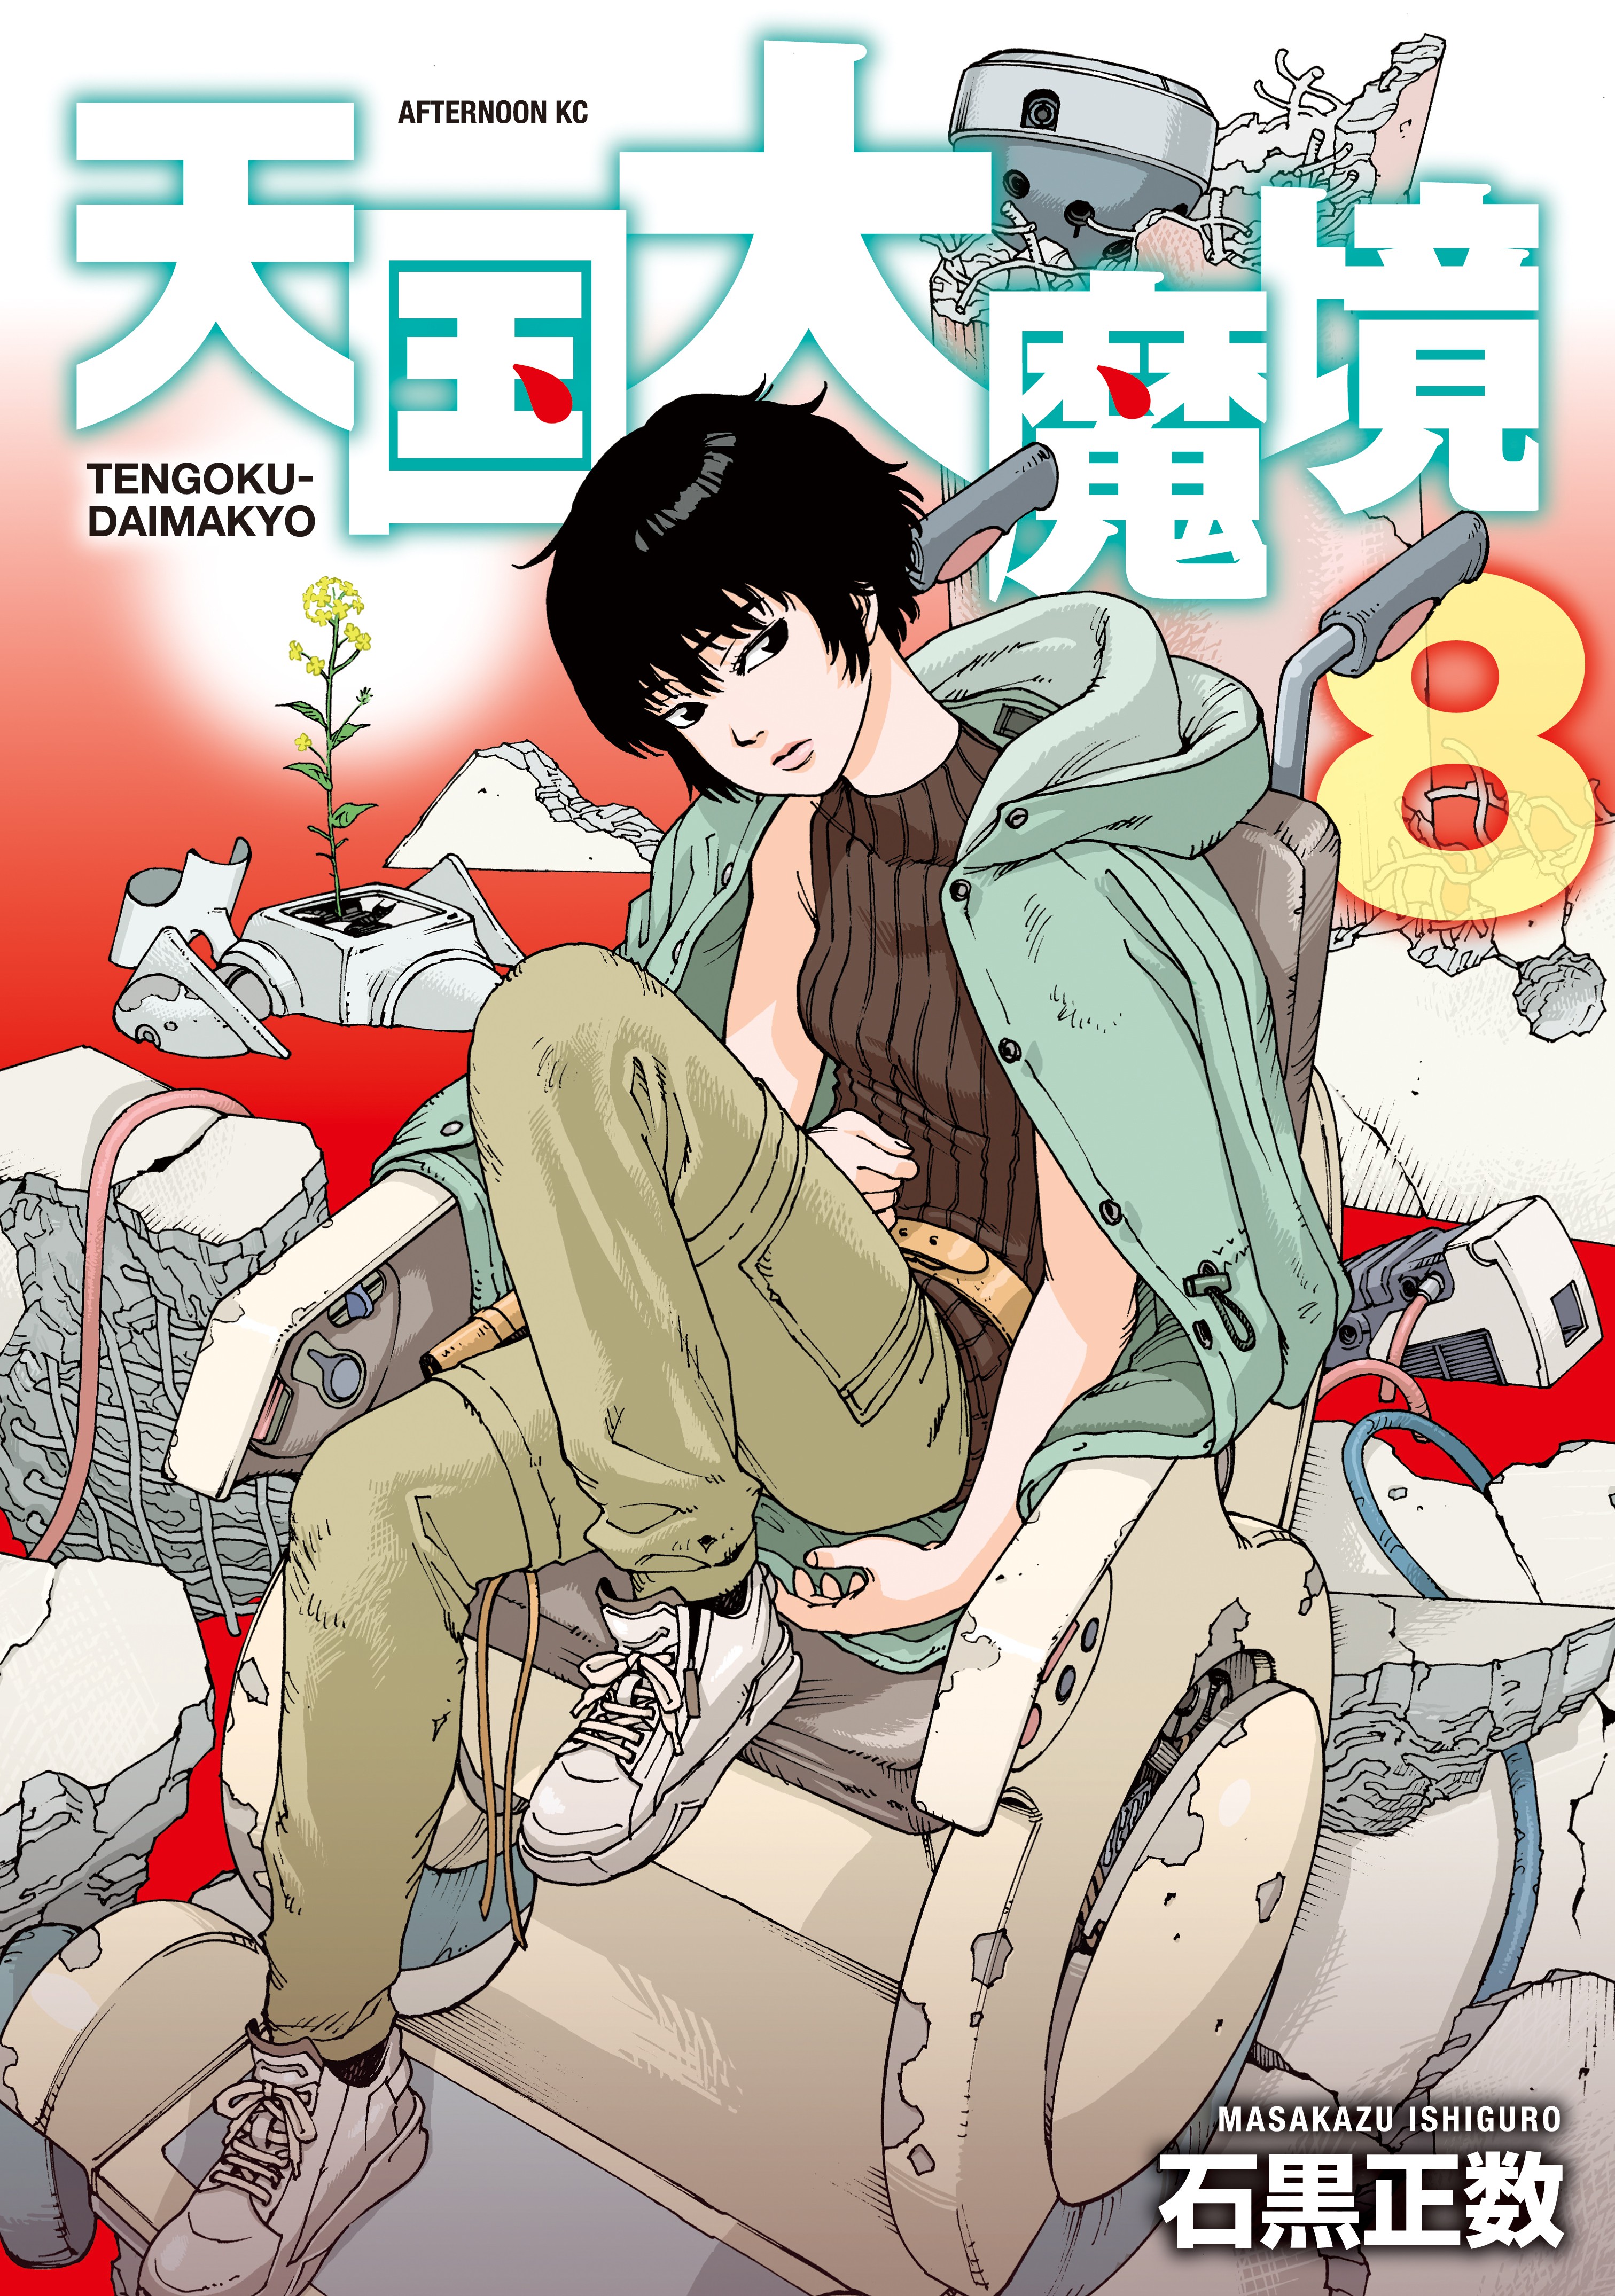 How many chapters will the aspect of 13ep cover from the manga. Tengoku  Daimakyou / Heavenly delusion : r/HeavenlyDelusion